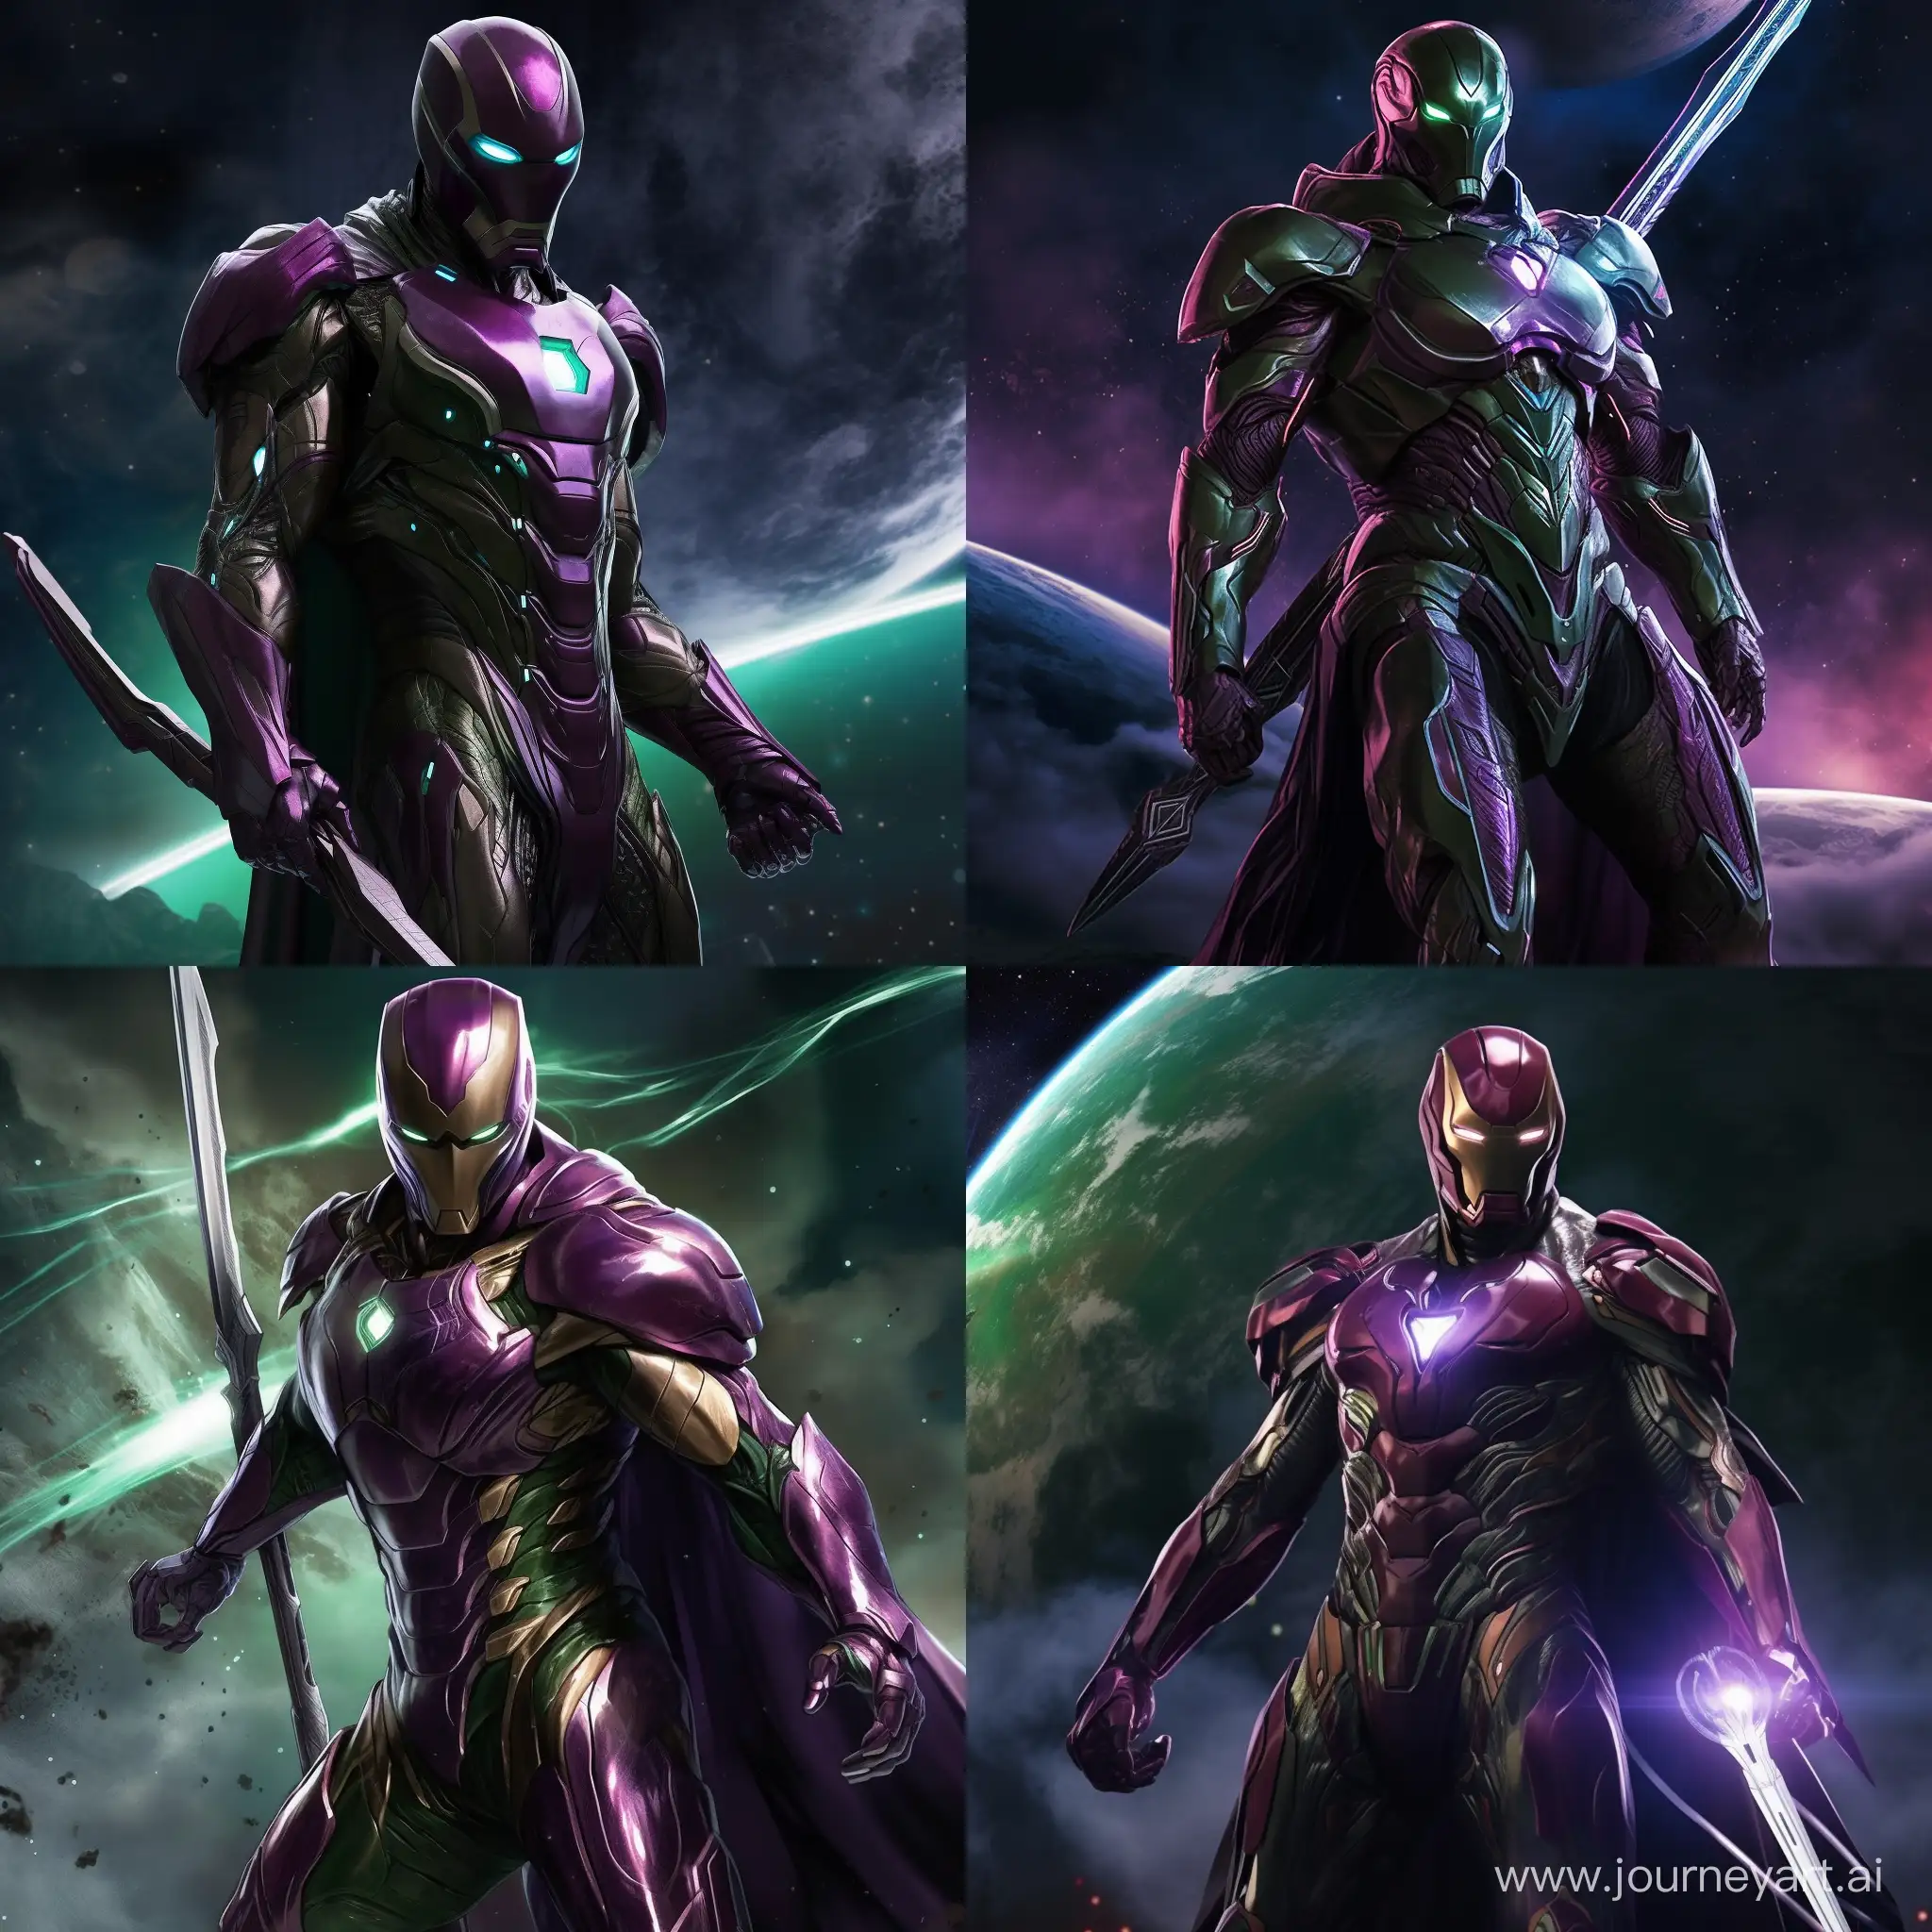 Epic-Battle-Iron-Man-in-GreenPurple-Suit-Confronts-Thor-with-Spear-and-Cloak-in-Outer-Space